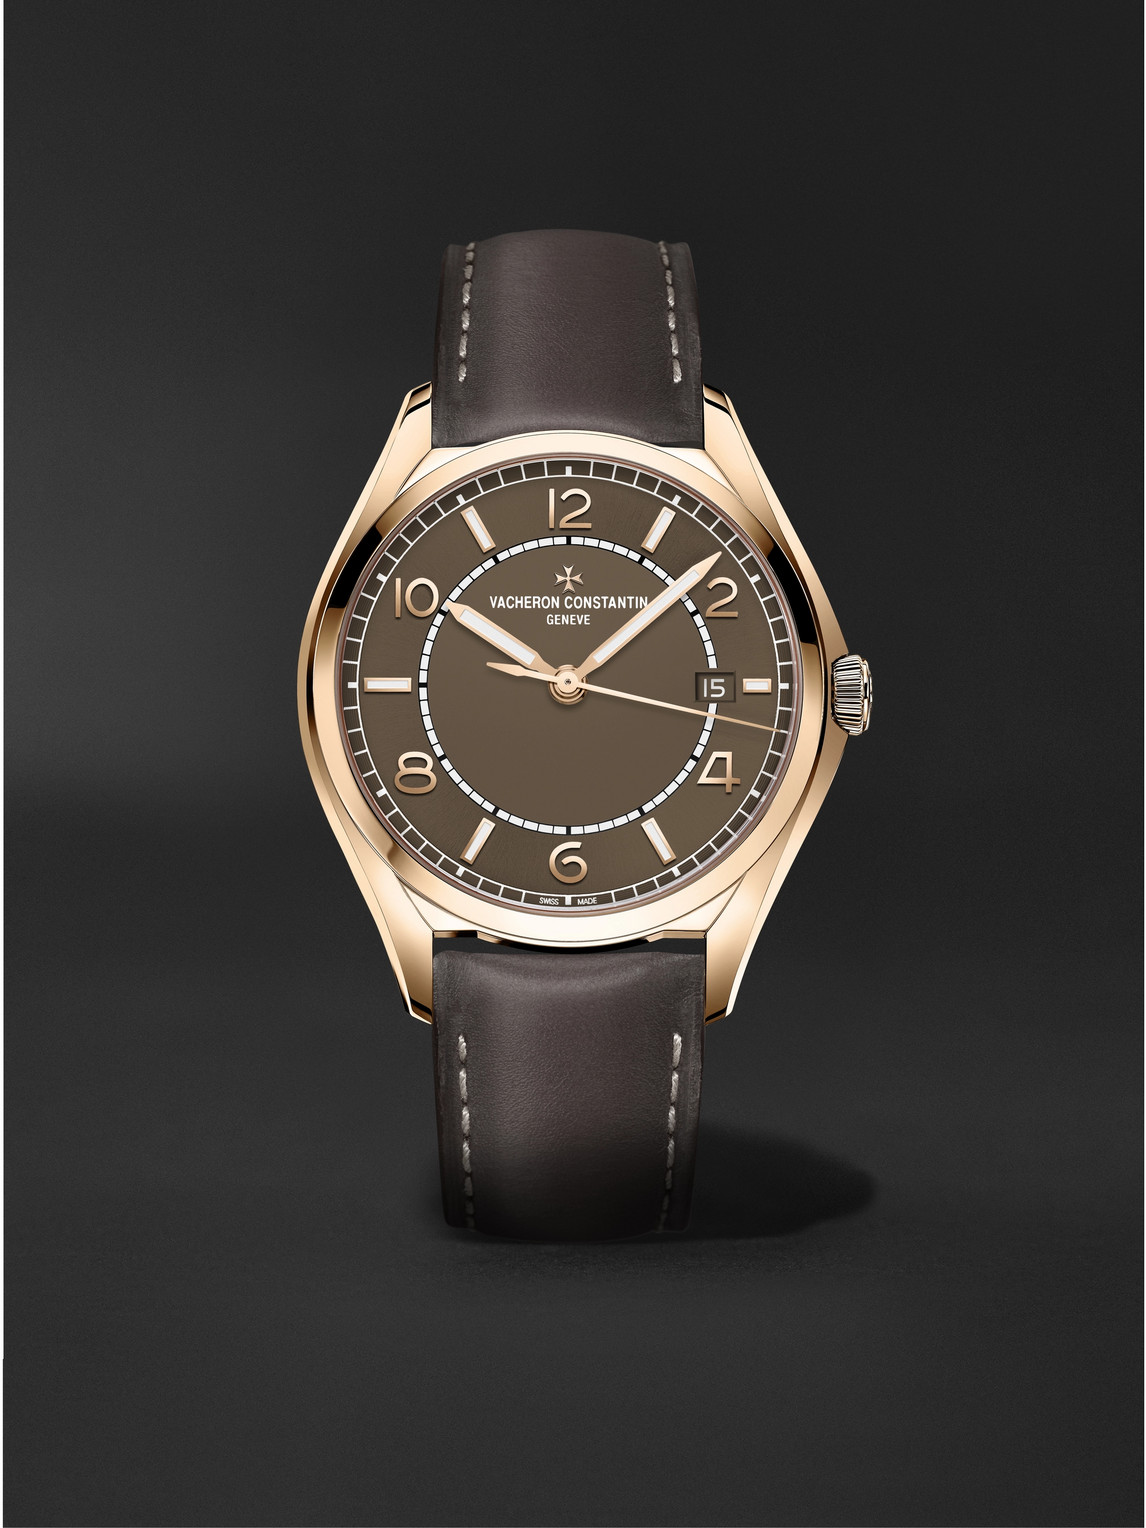 Vacheron Constantin Fiftysix Automatic 40mm 18-karat Pink Gold And Leather Watch, Ref. No. 4600e/000r-b576 In Brown